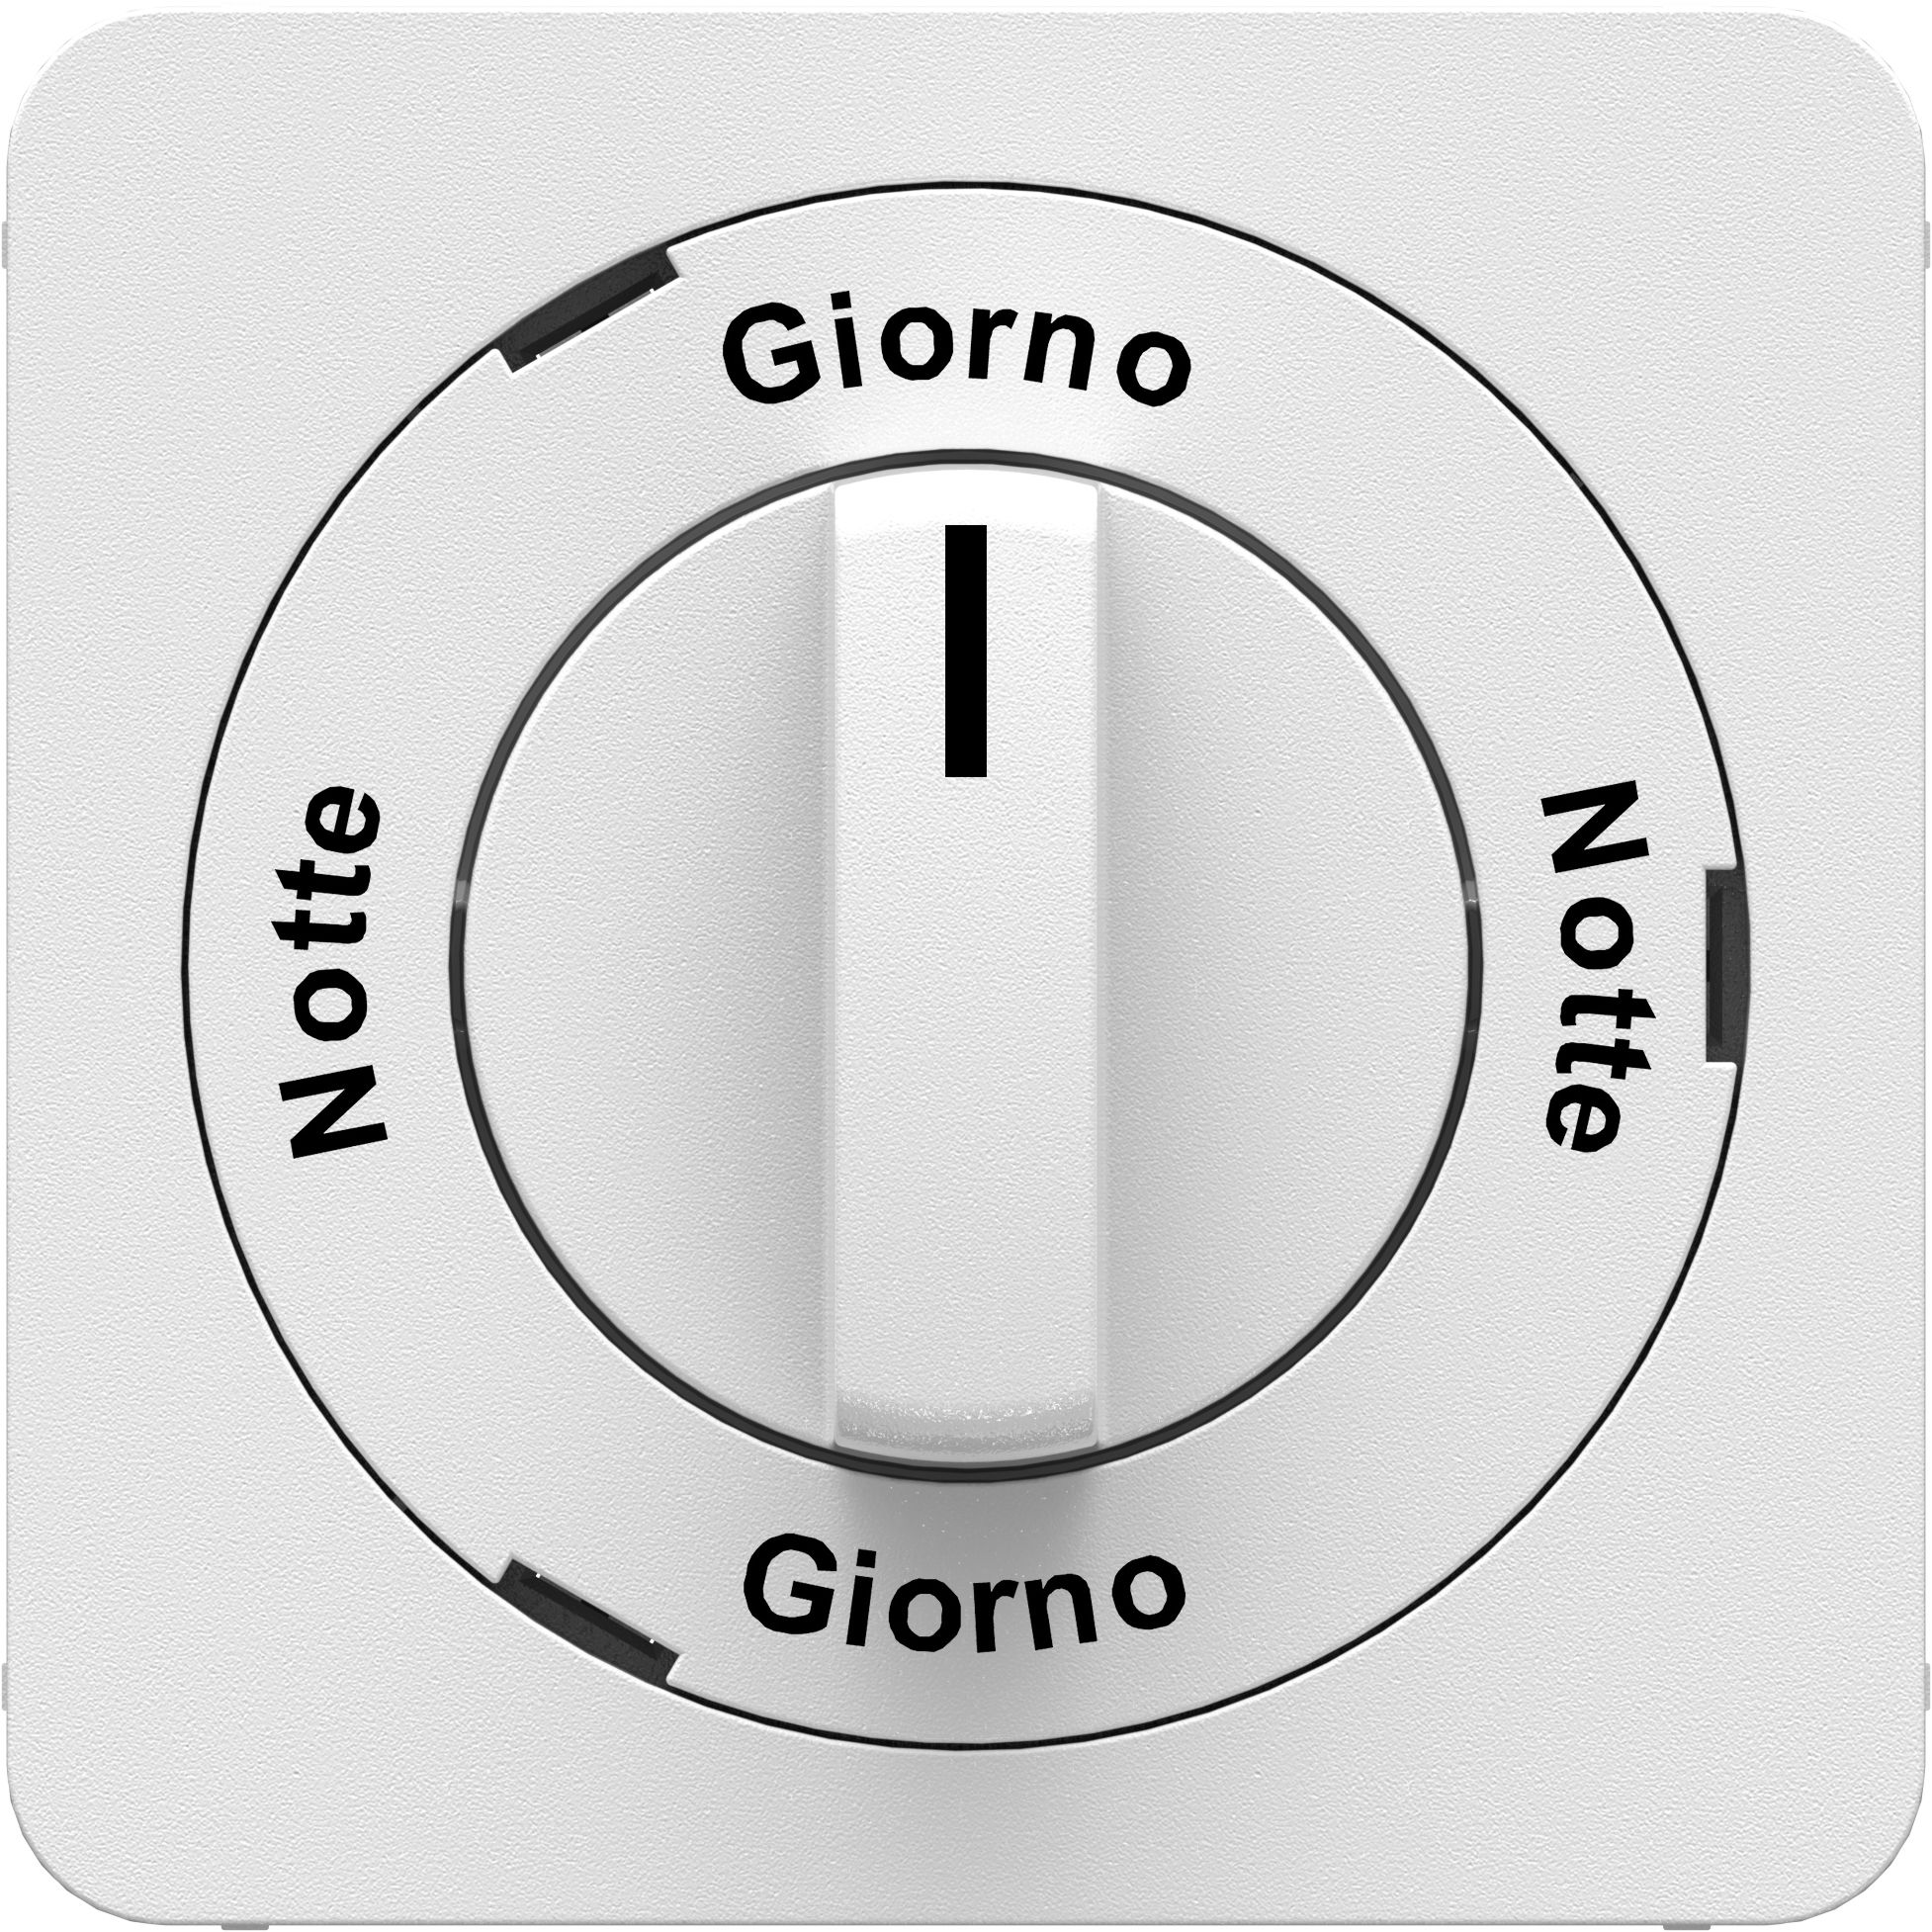 Front plates for turnable switch Notte-Giorno-Not.-Gio.